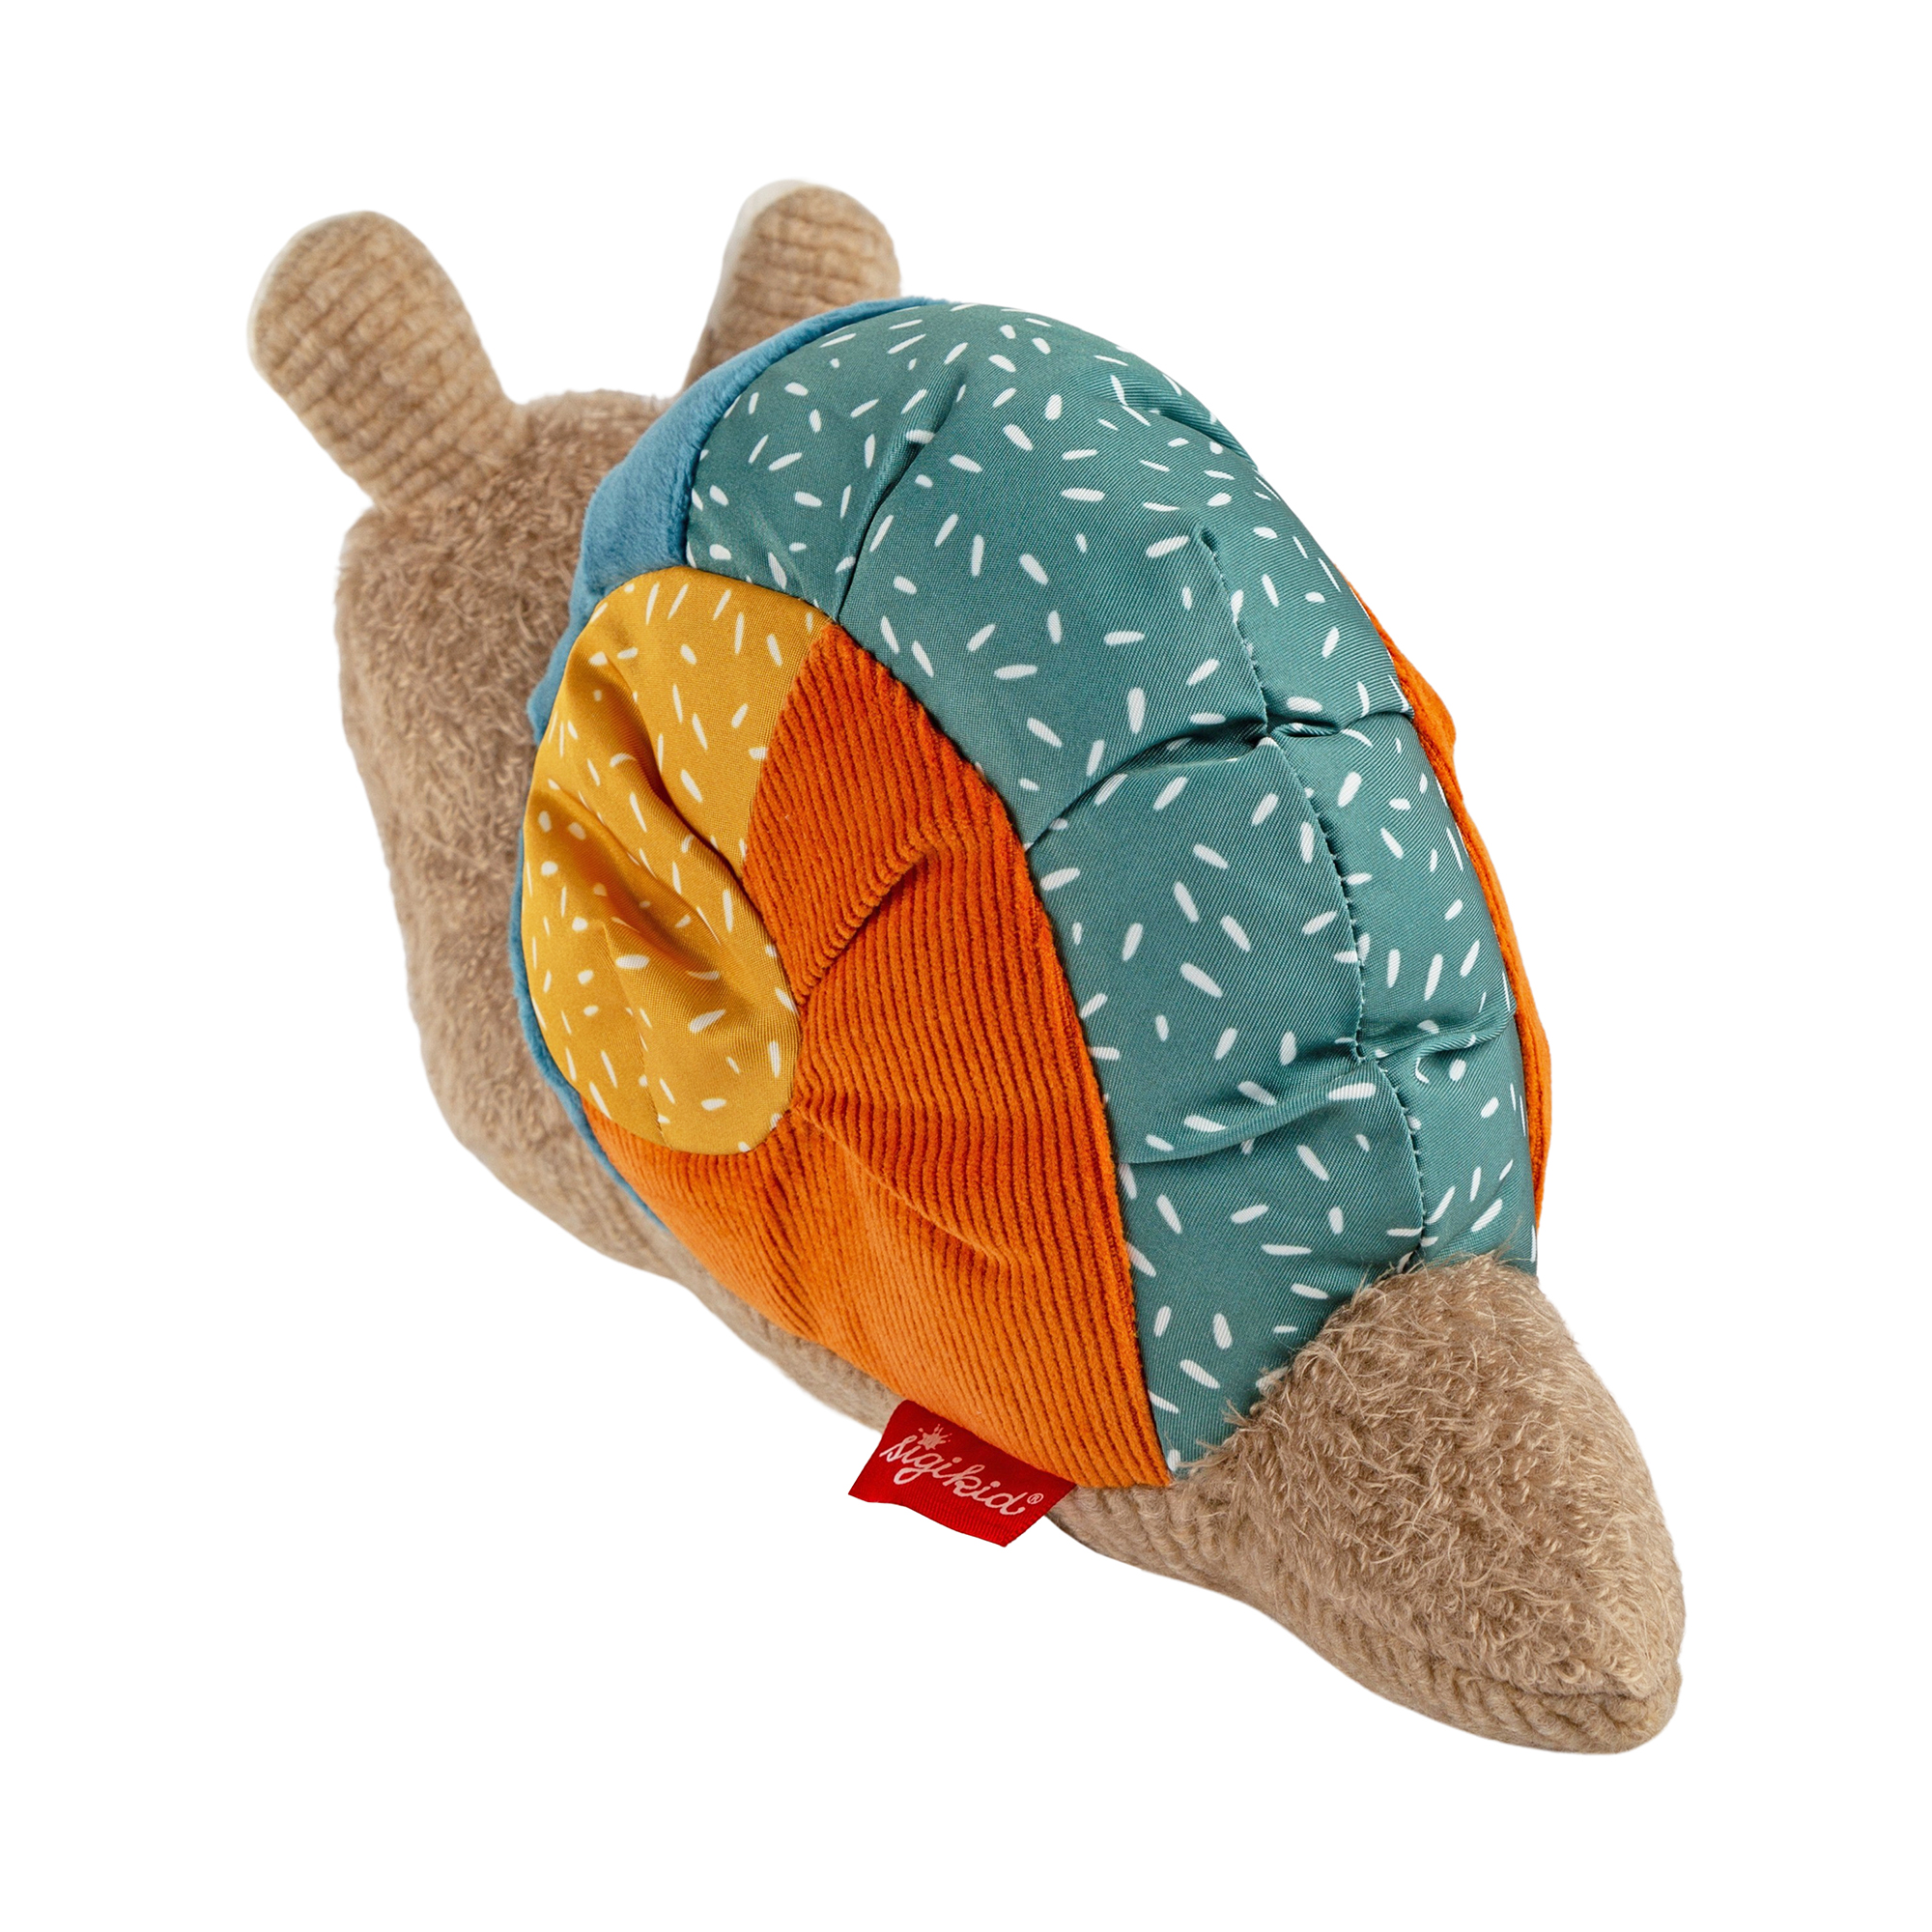 Plush toy snail, Patchwork Sweety